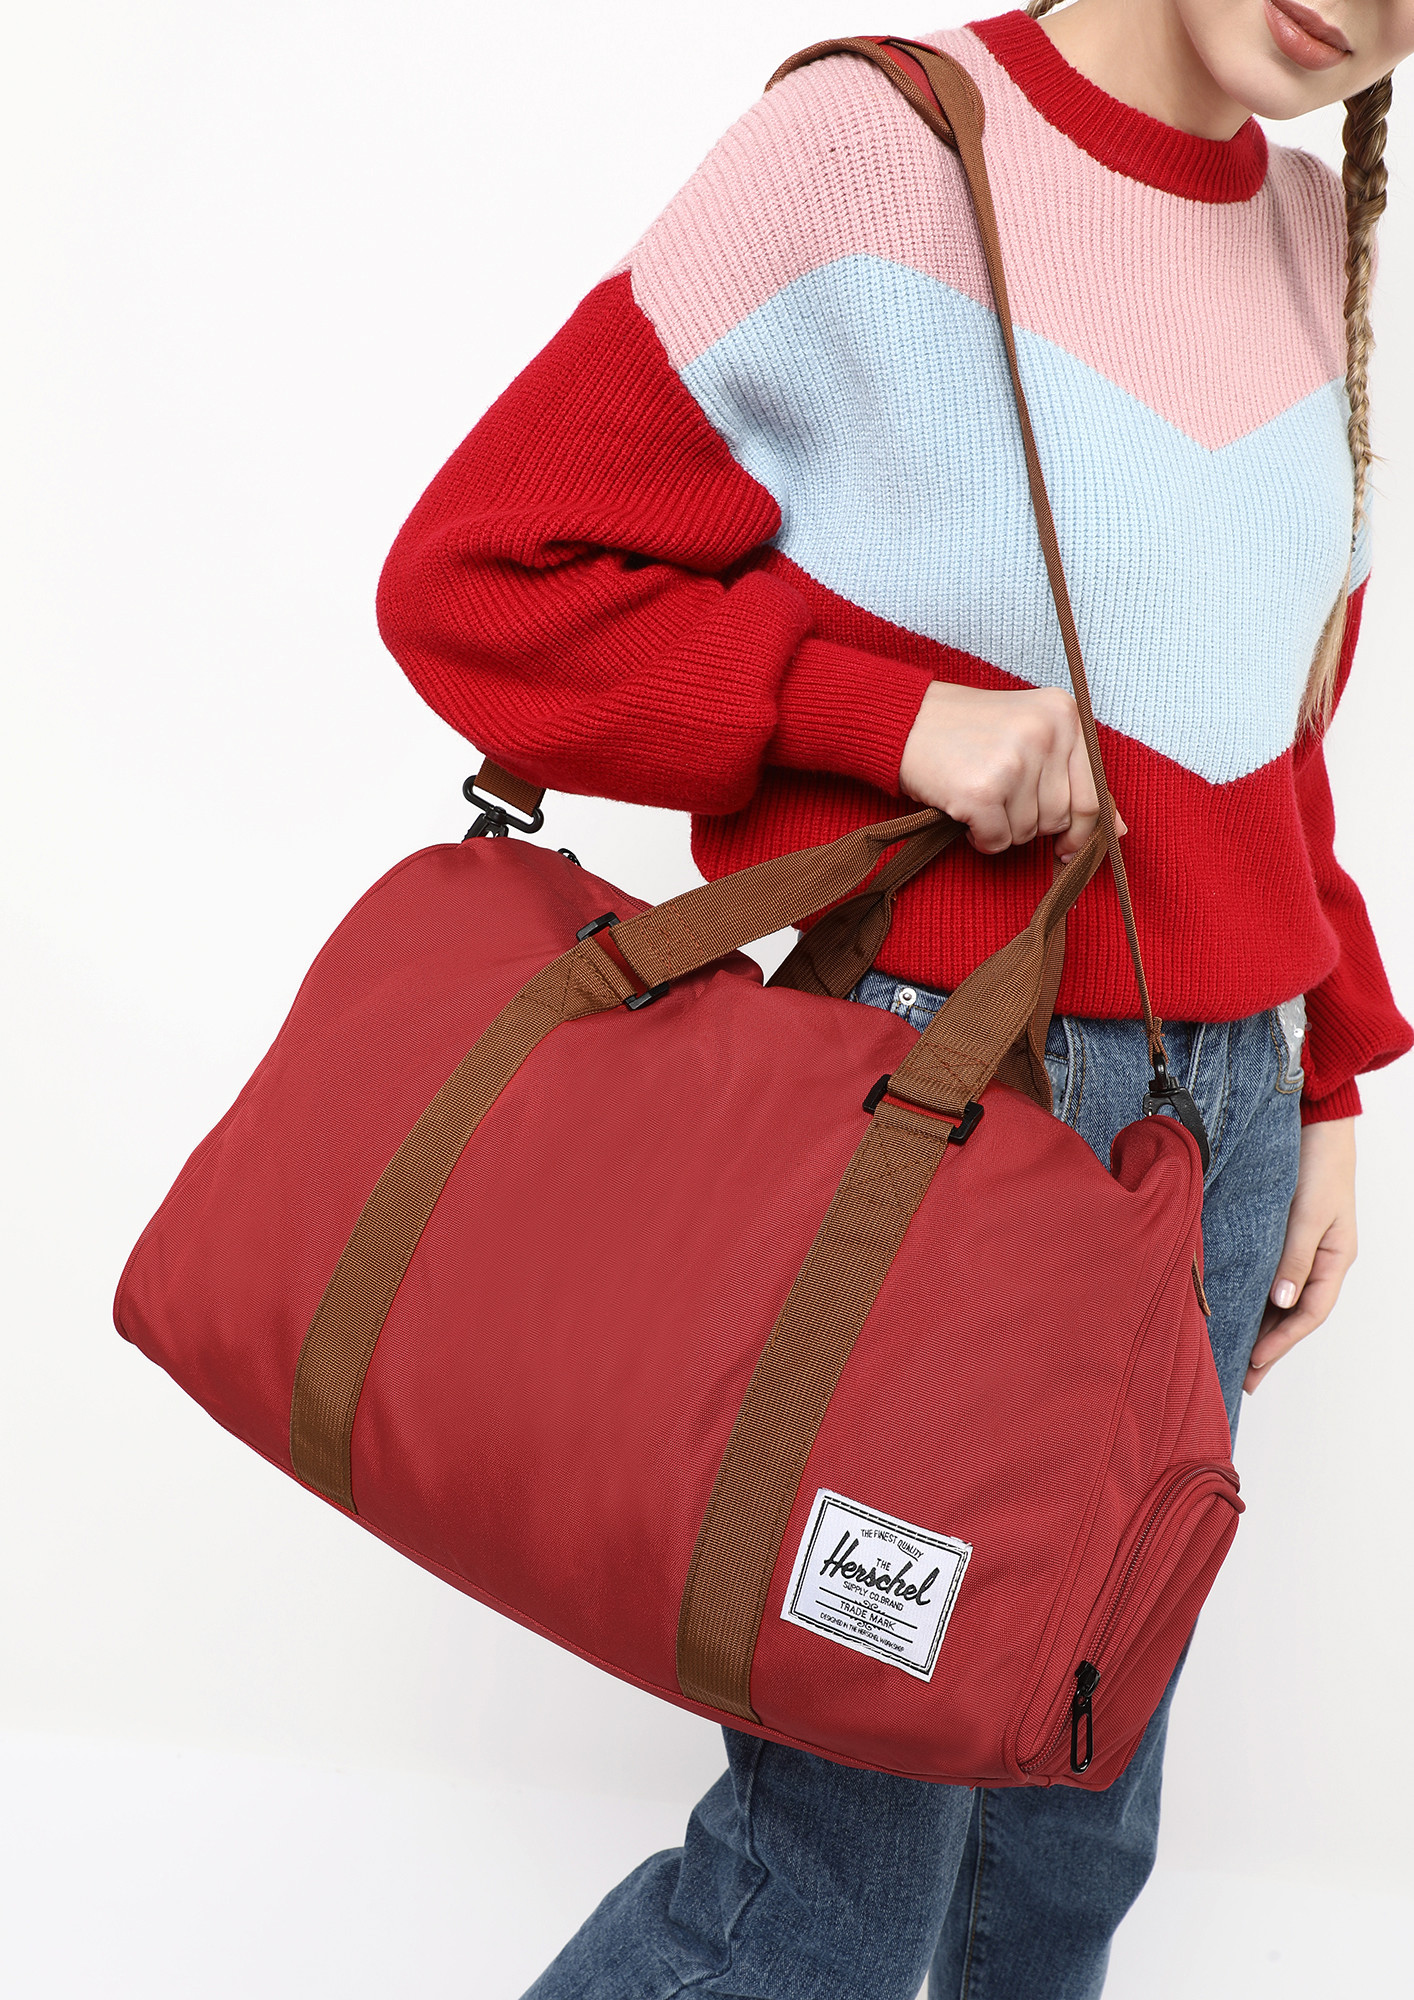 ALL WORKED UP RED DUFFLE BAG